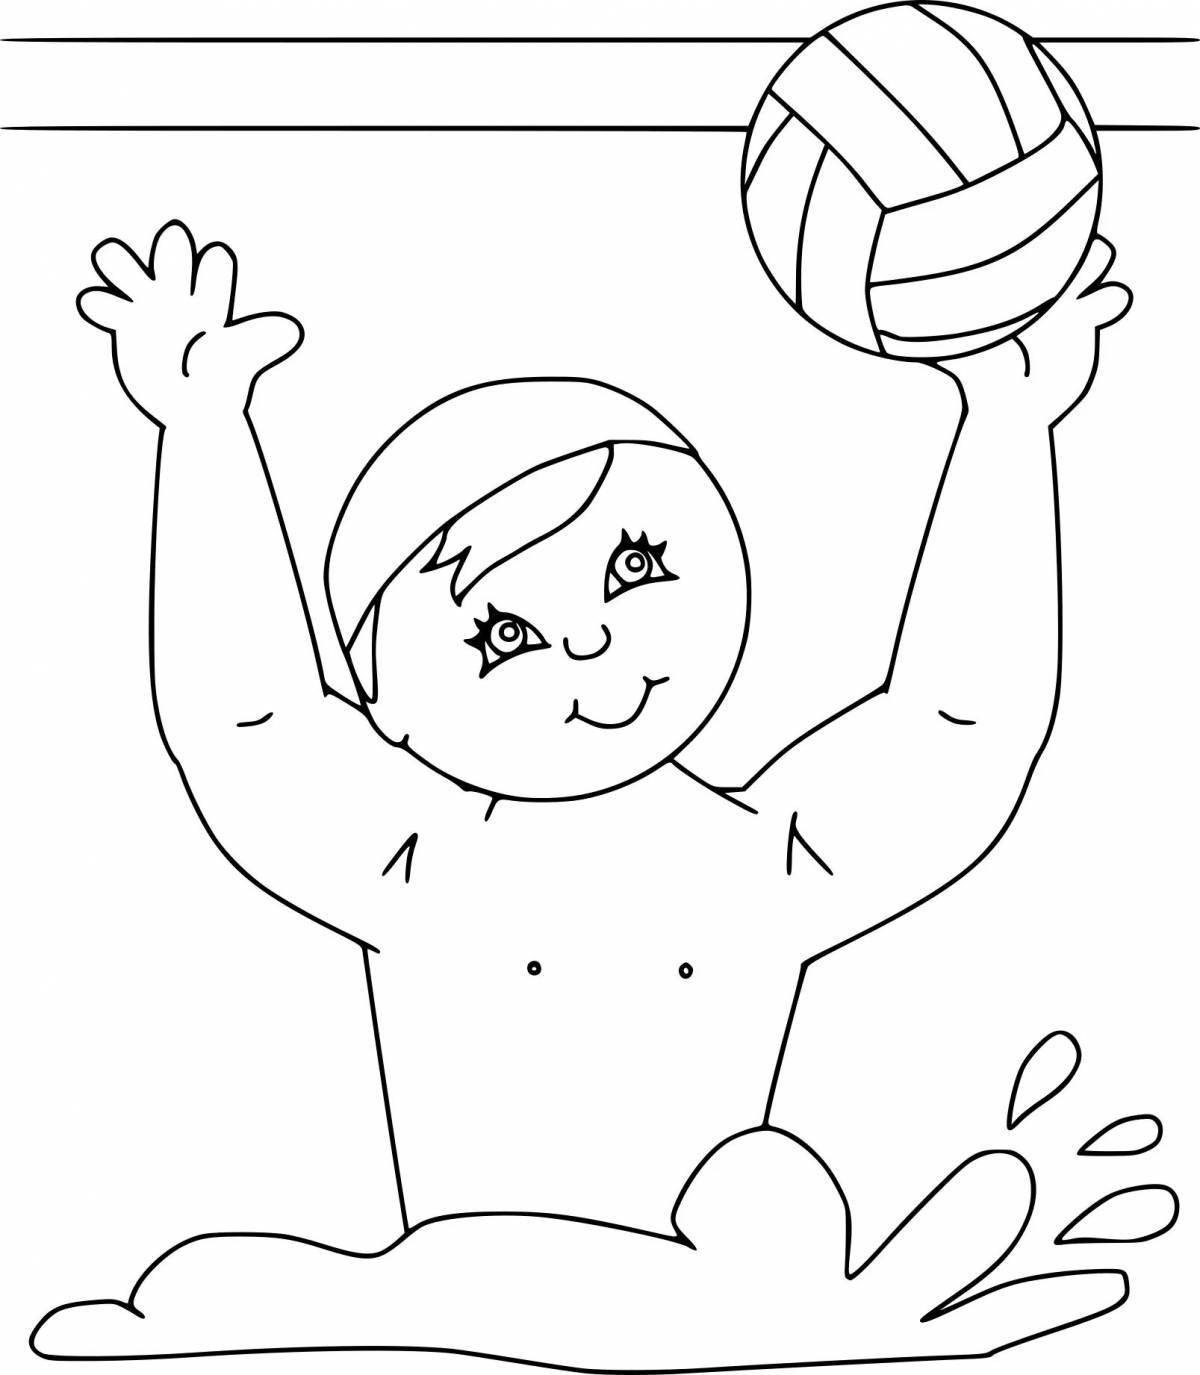 Exciting sports and healthy lifestyle coloring book